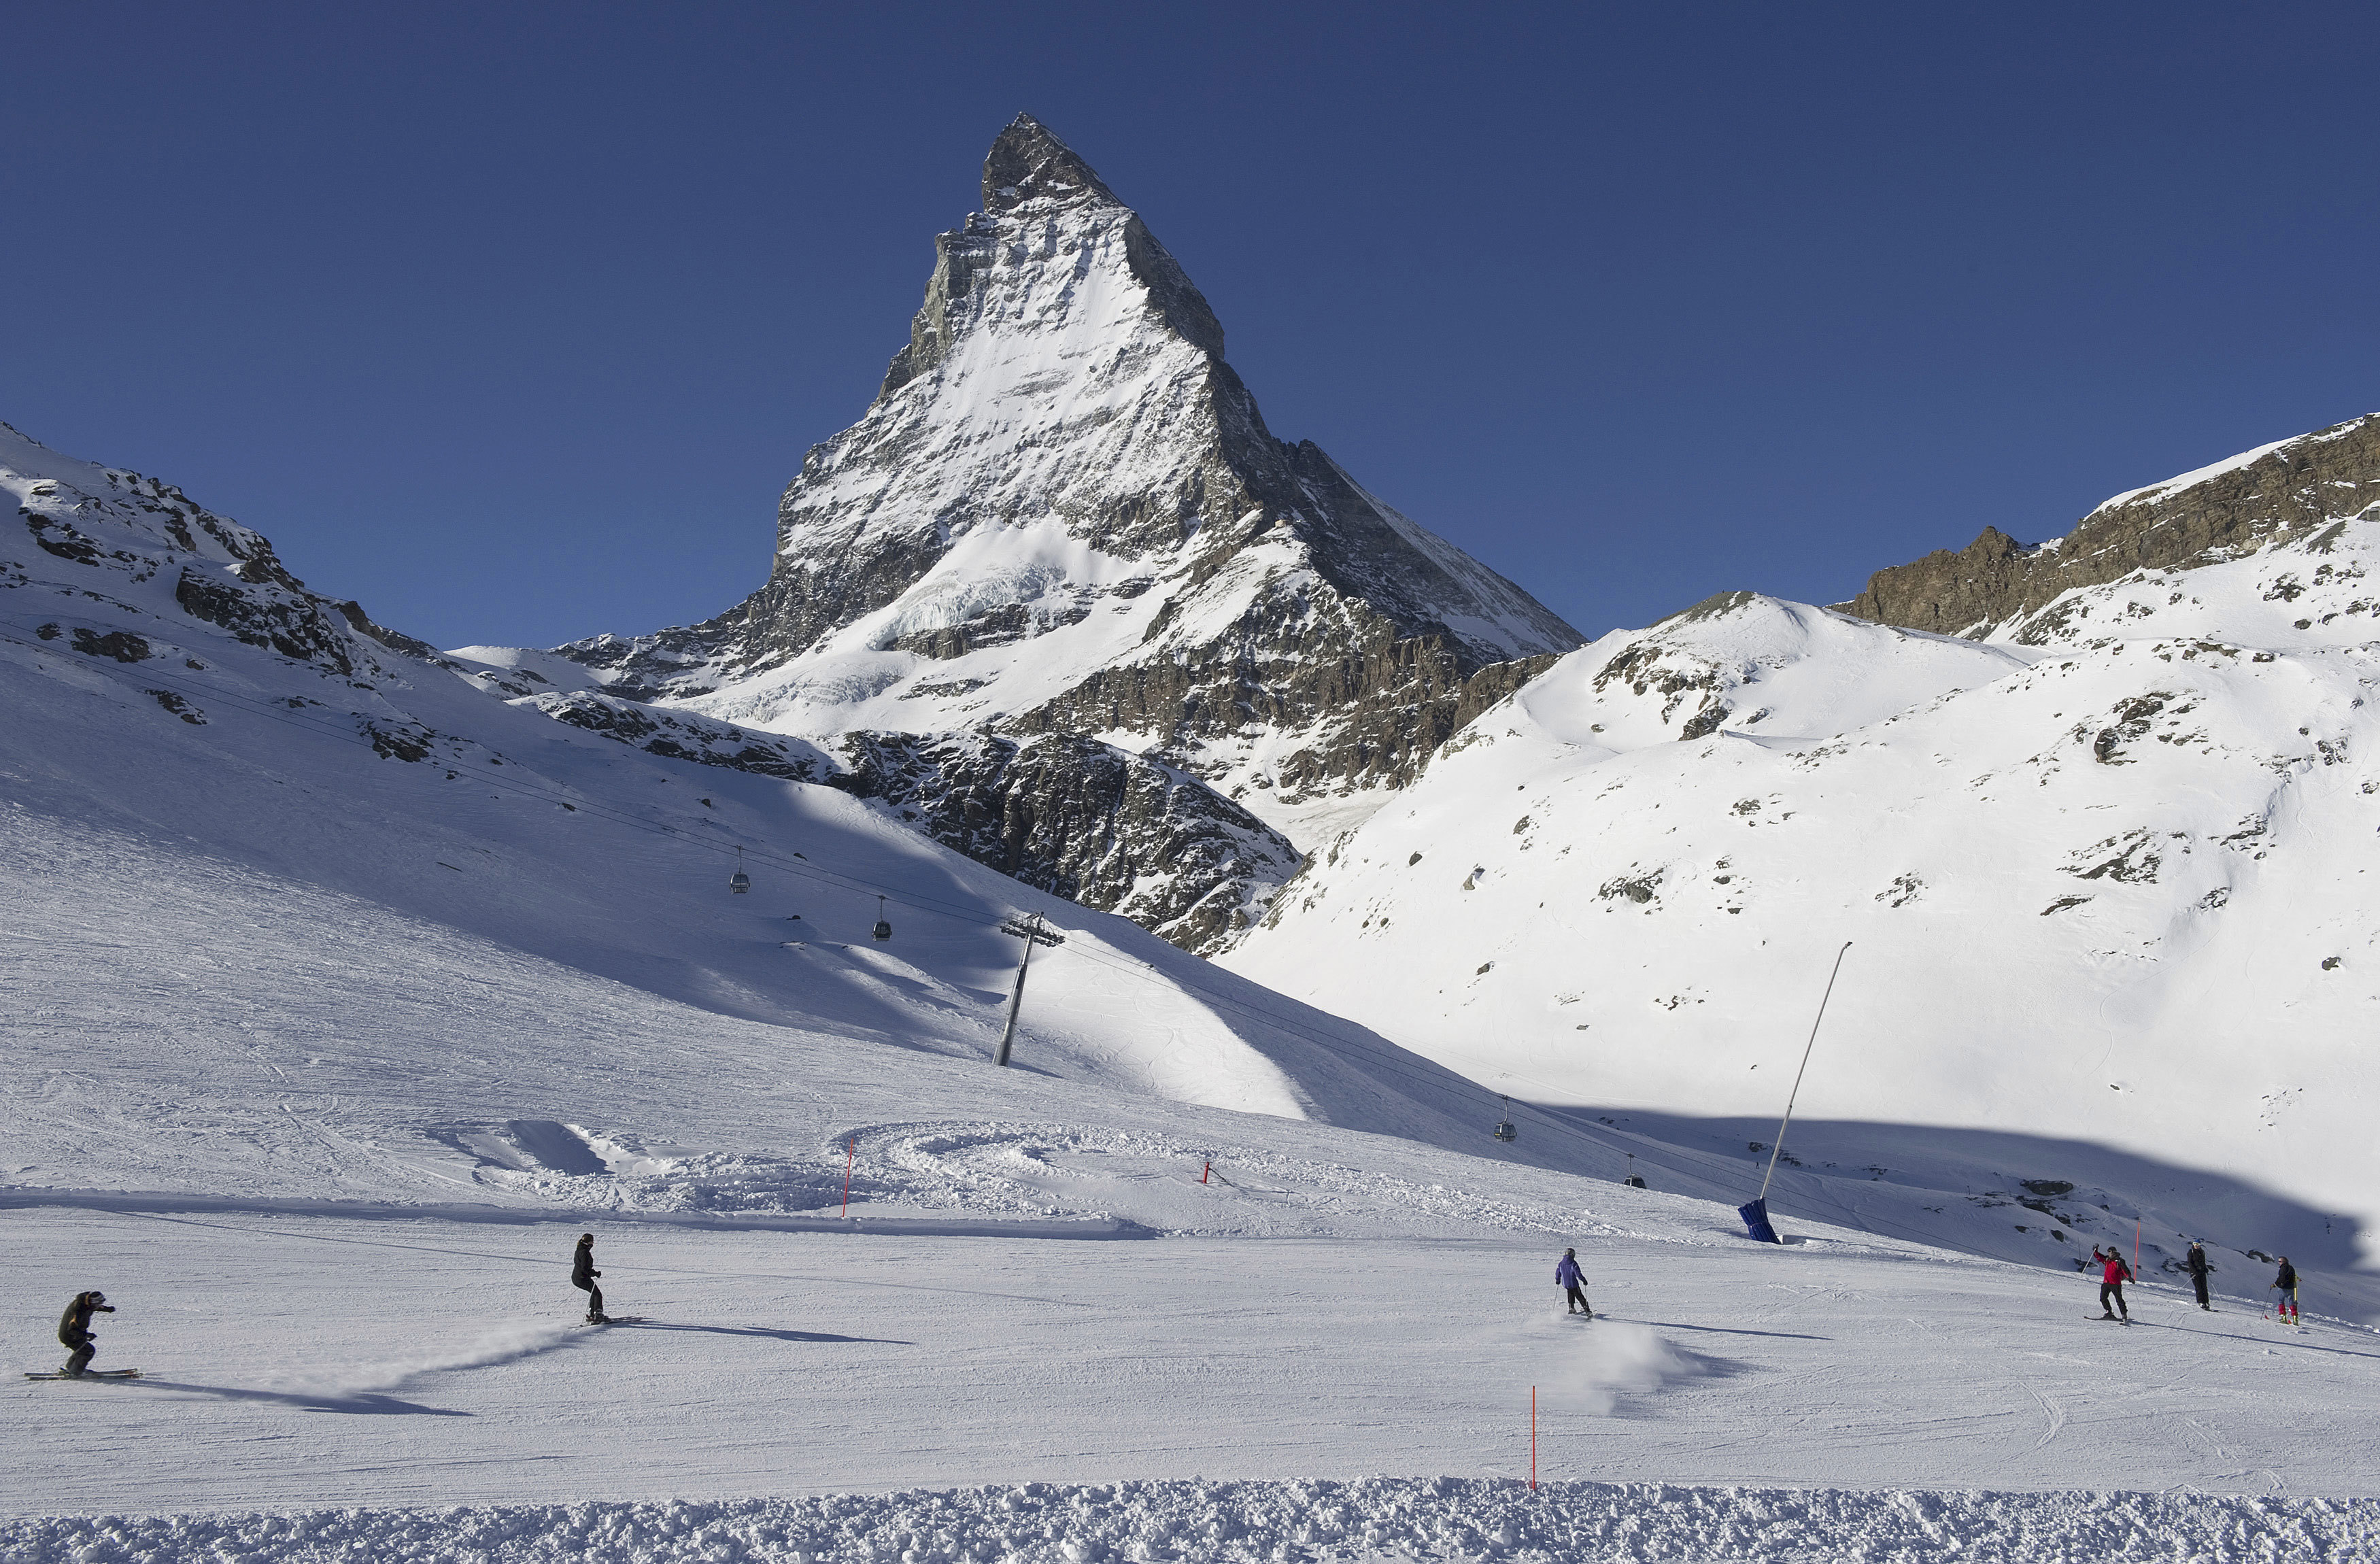 US teen and two other skiers killed in Swiss avalanche